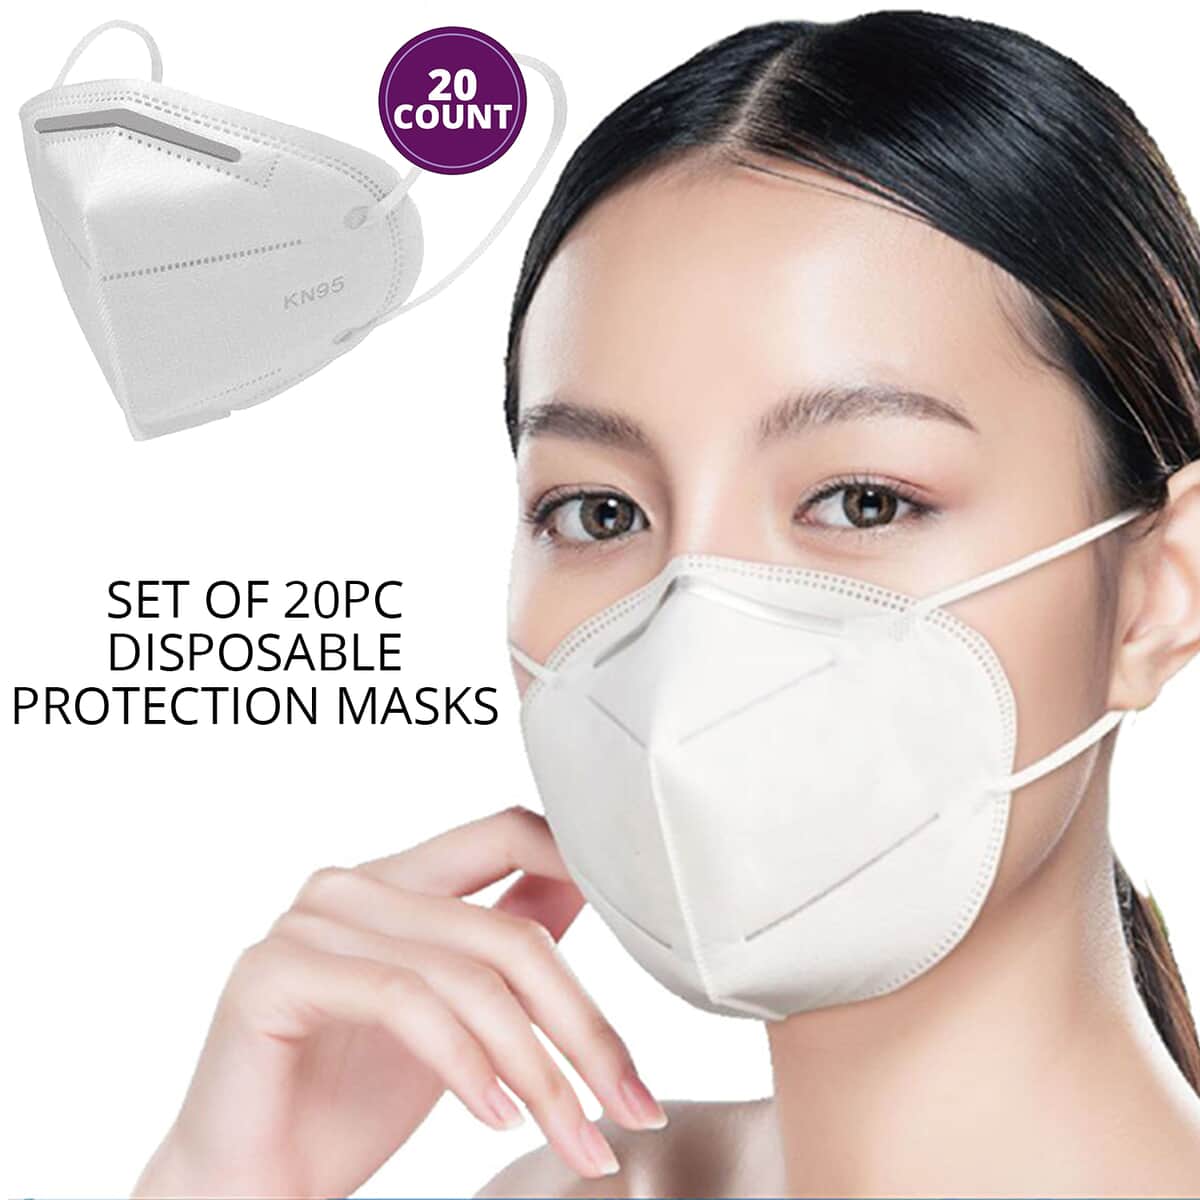 Set of 20 KN95 Disposable Protection Masks 4 Layer (Non Returnable) image number 1